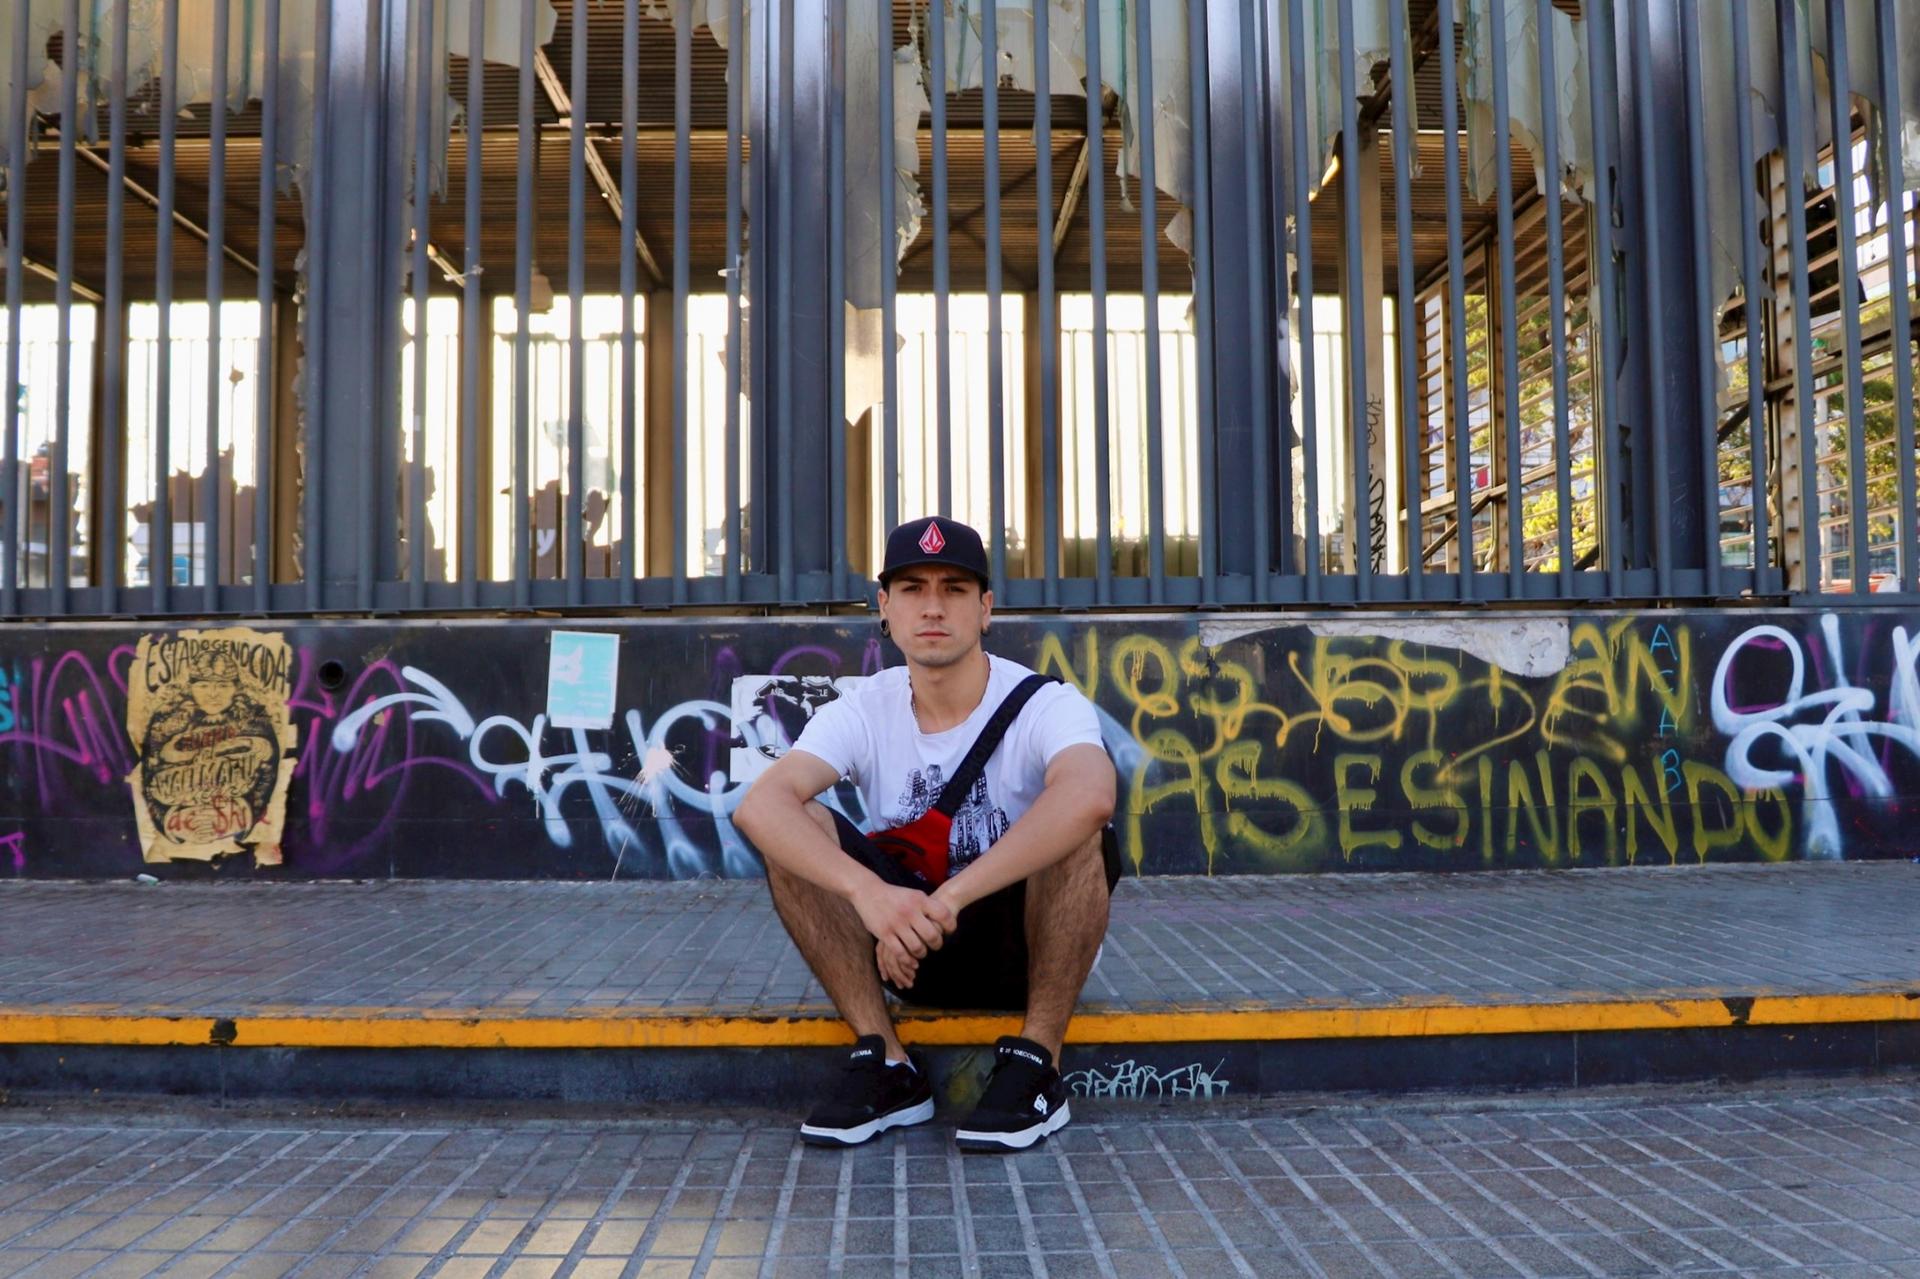 History student Frank Araneda, 23, takes a break from protesting at a vandalized metro station in Maipú, a low-income neighborhood outside of Santiago, Chile. 